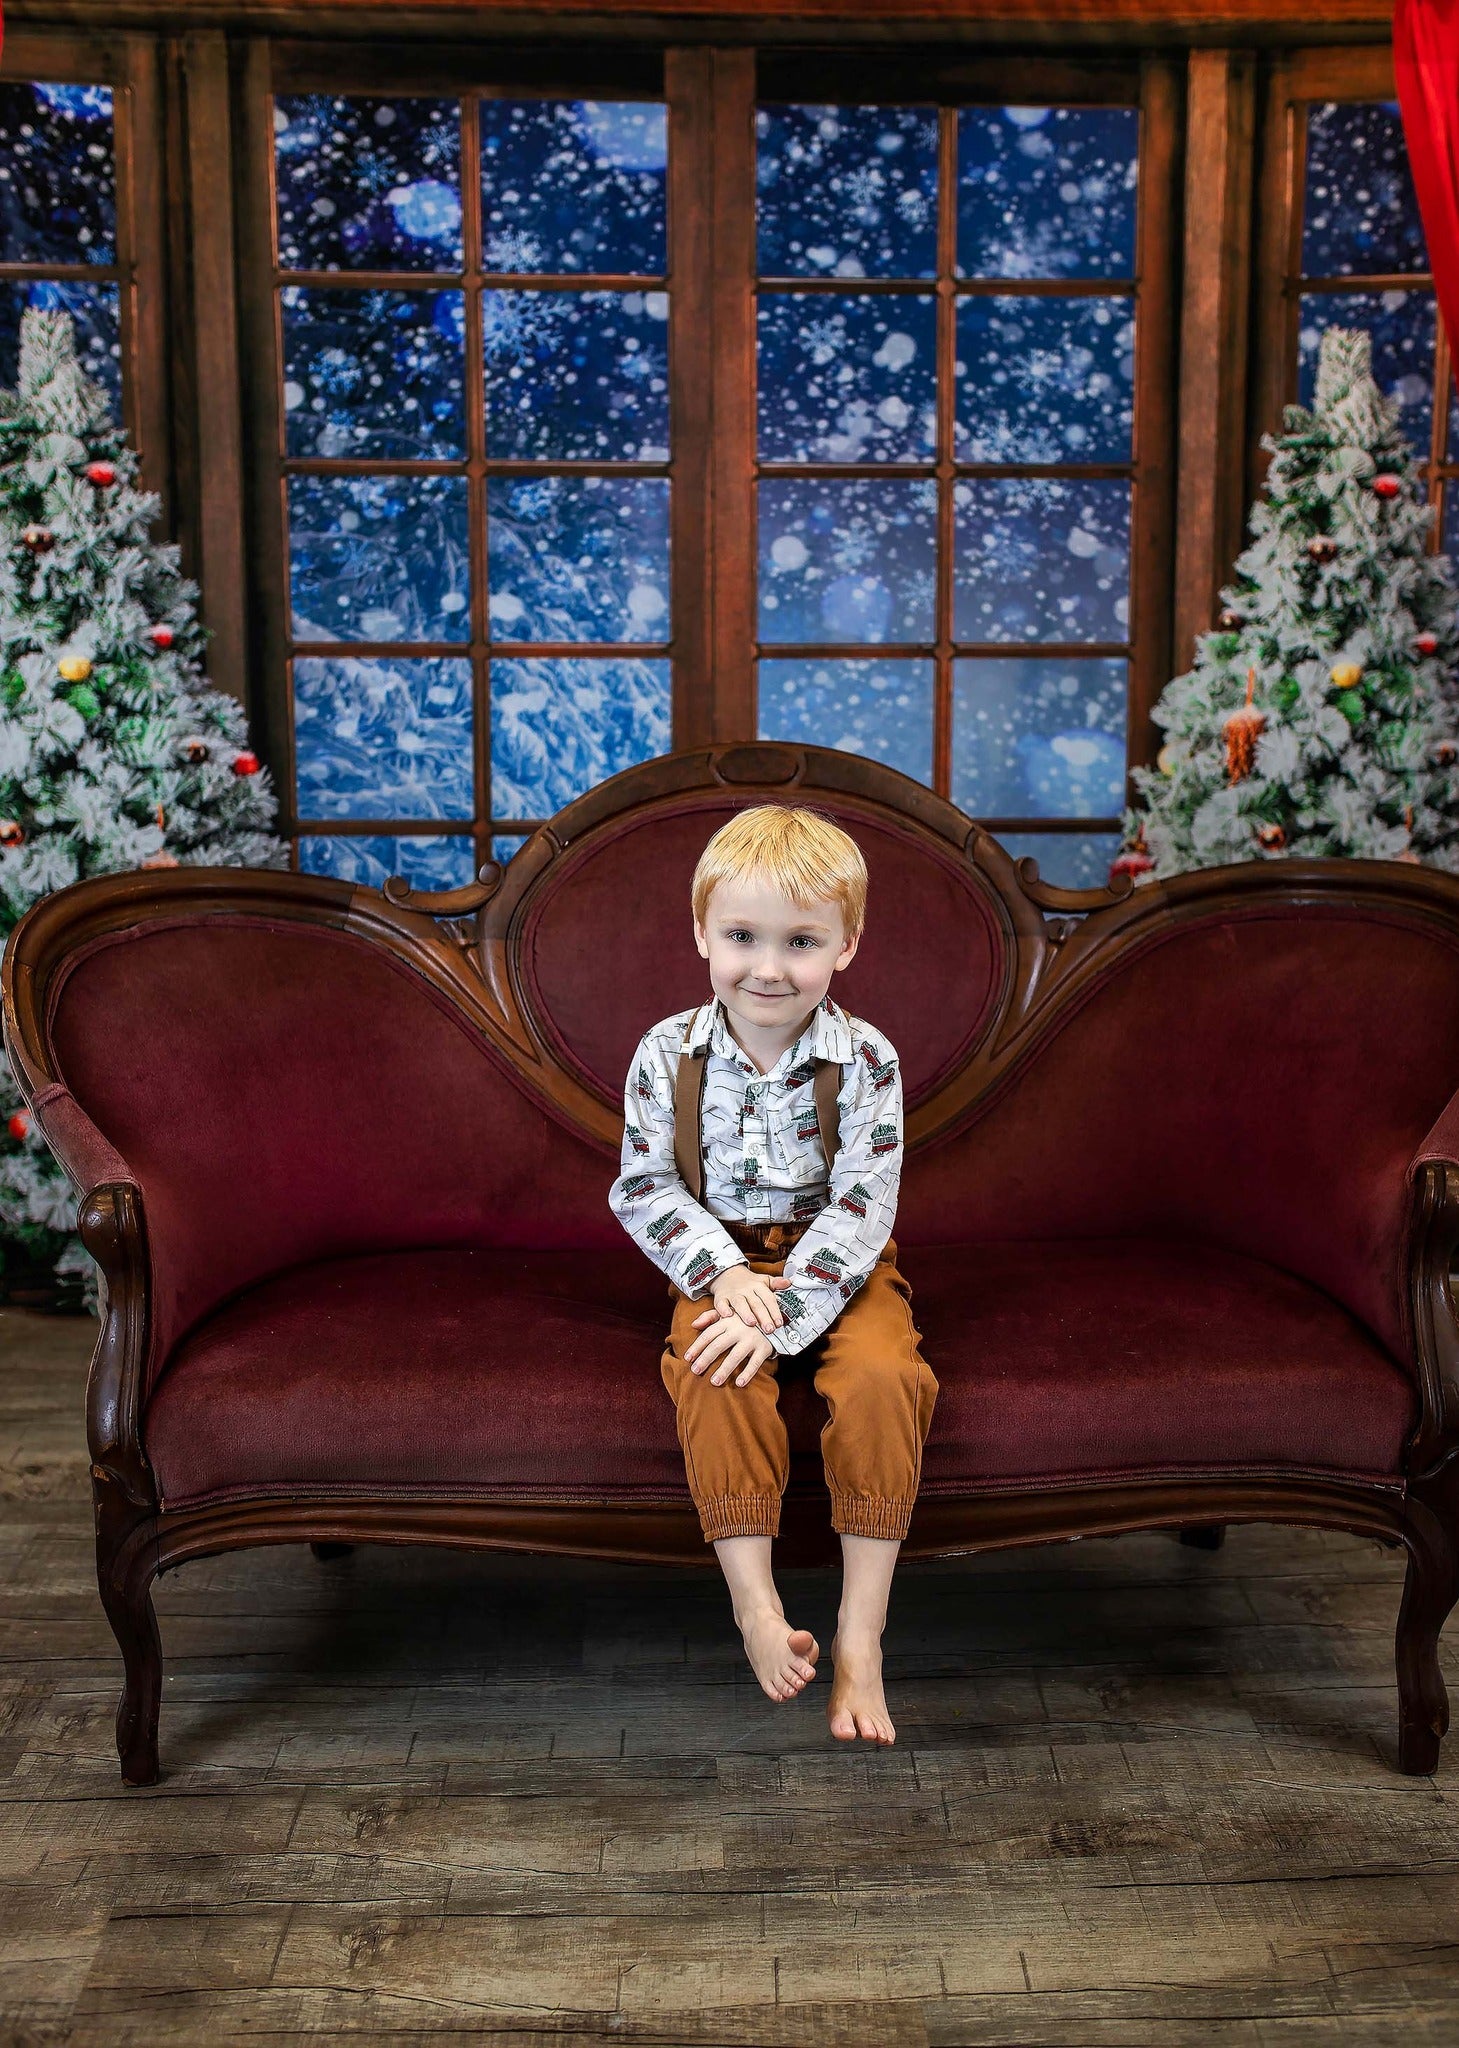 Kate Winter Snow Christmas Window Backdrop Designed by Chain Photography